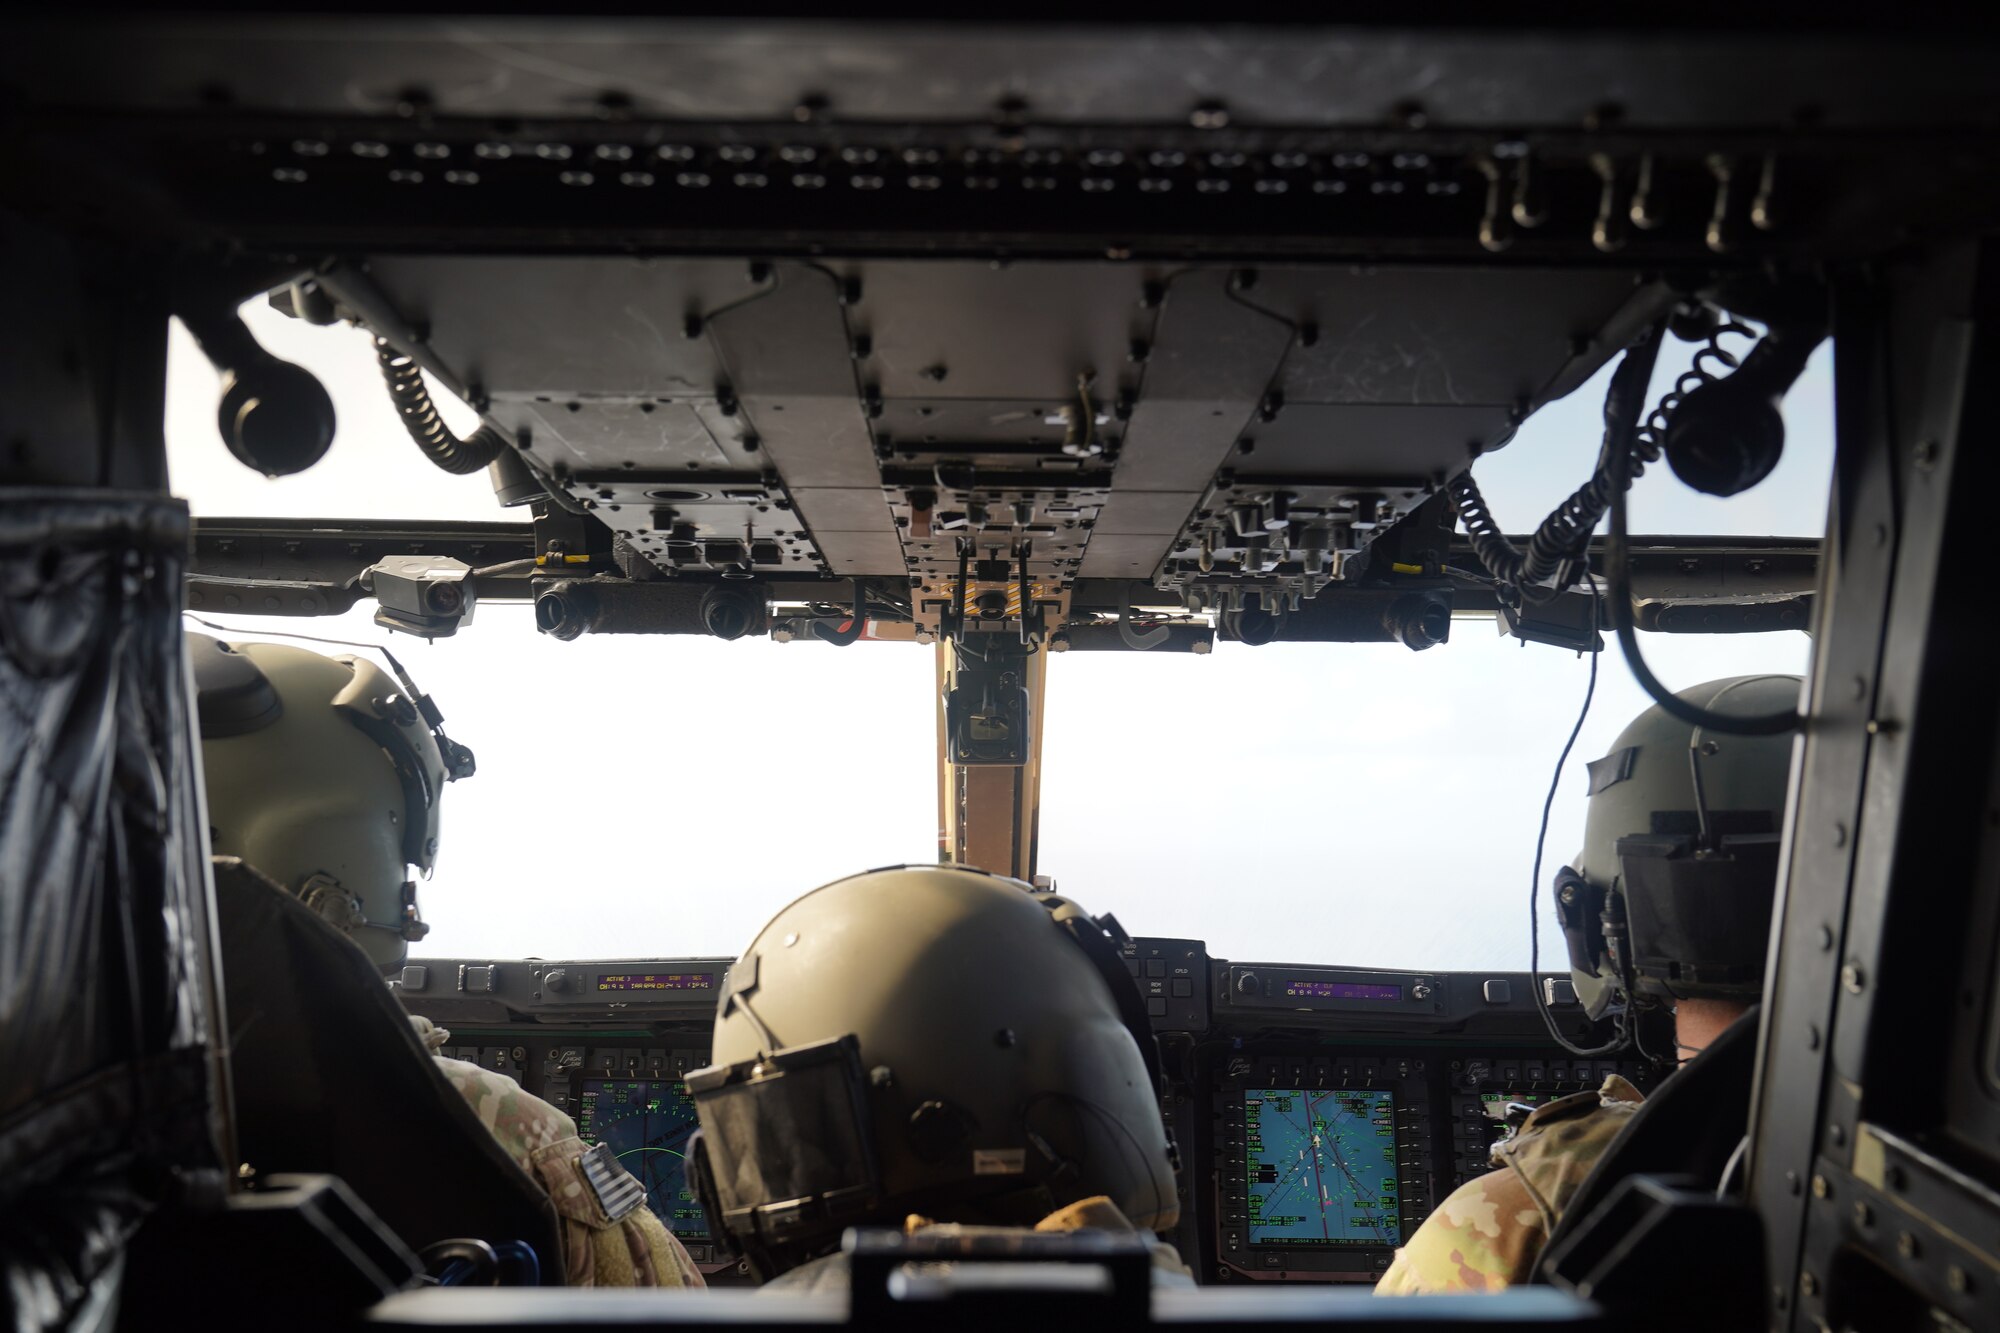 Airmen with the 21st Special Operations Squadron prepare to conduct tactical air-to-air refueling during search and rescue training off the coast of Okinawa, Japan, Nov. 1 9, 2020.